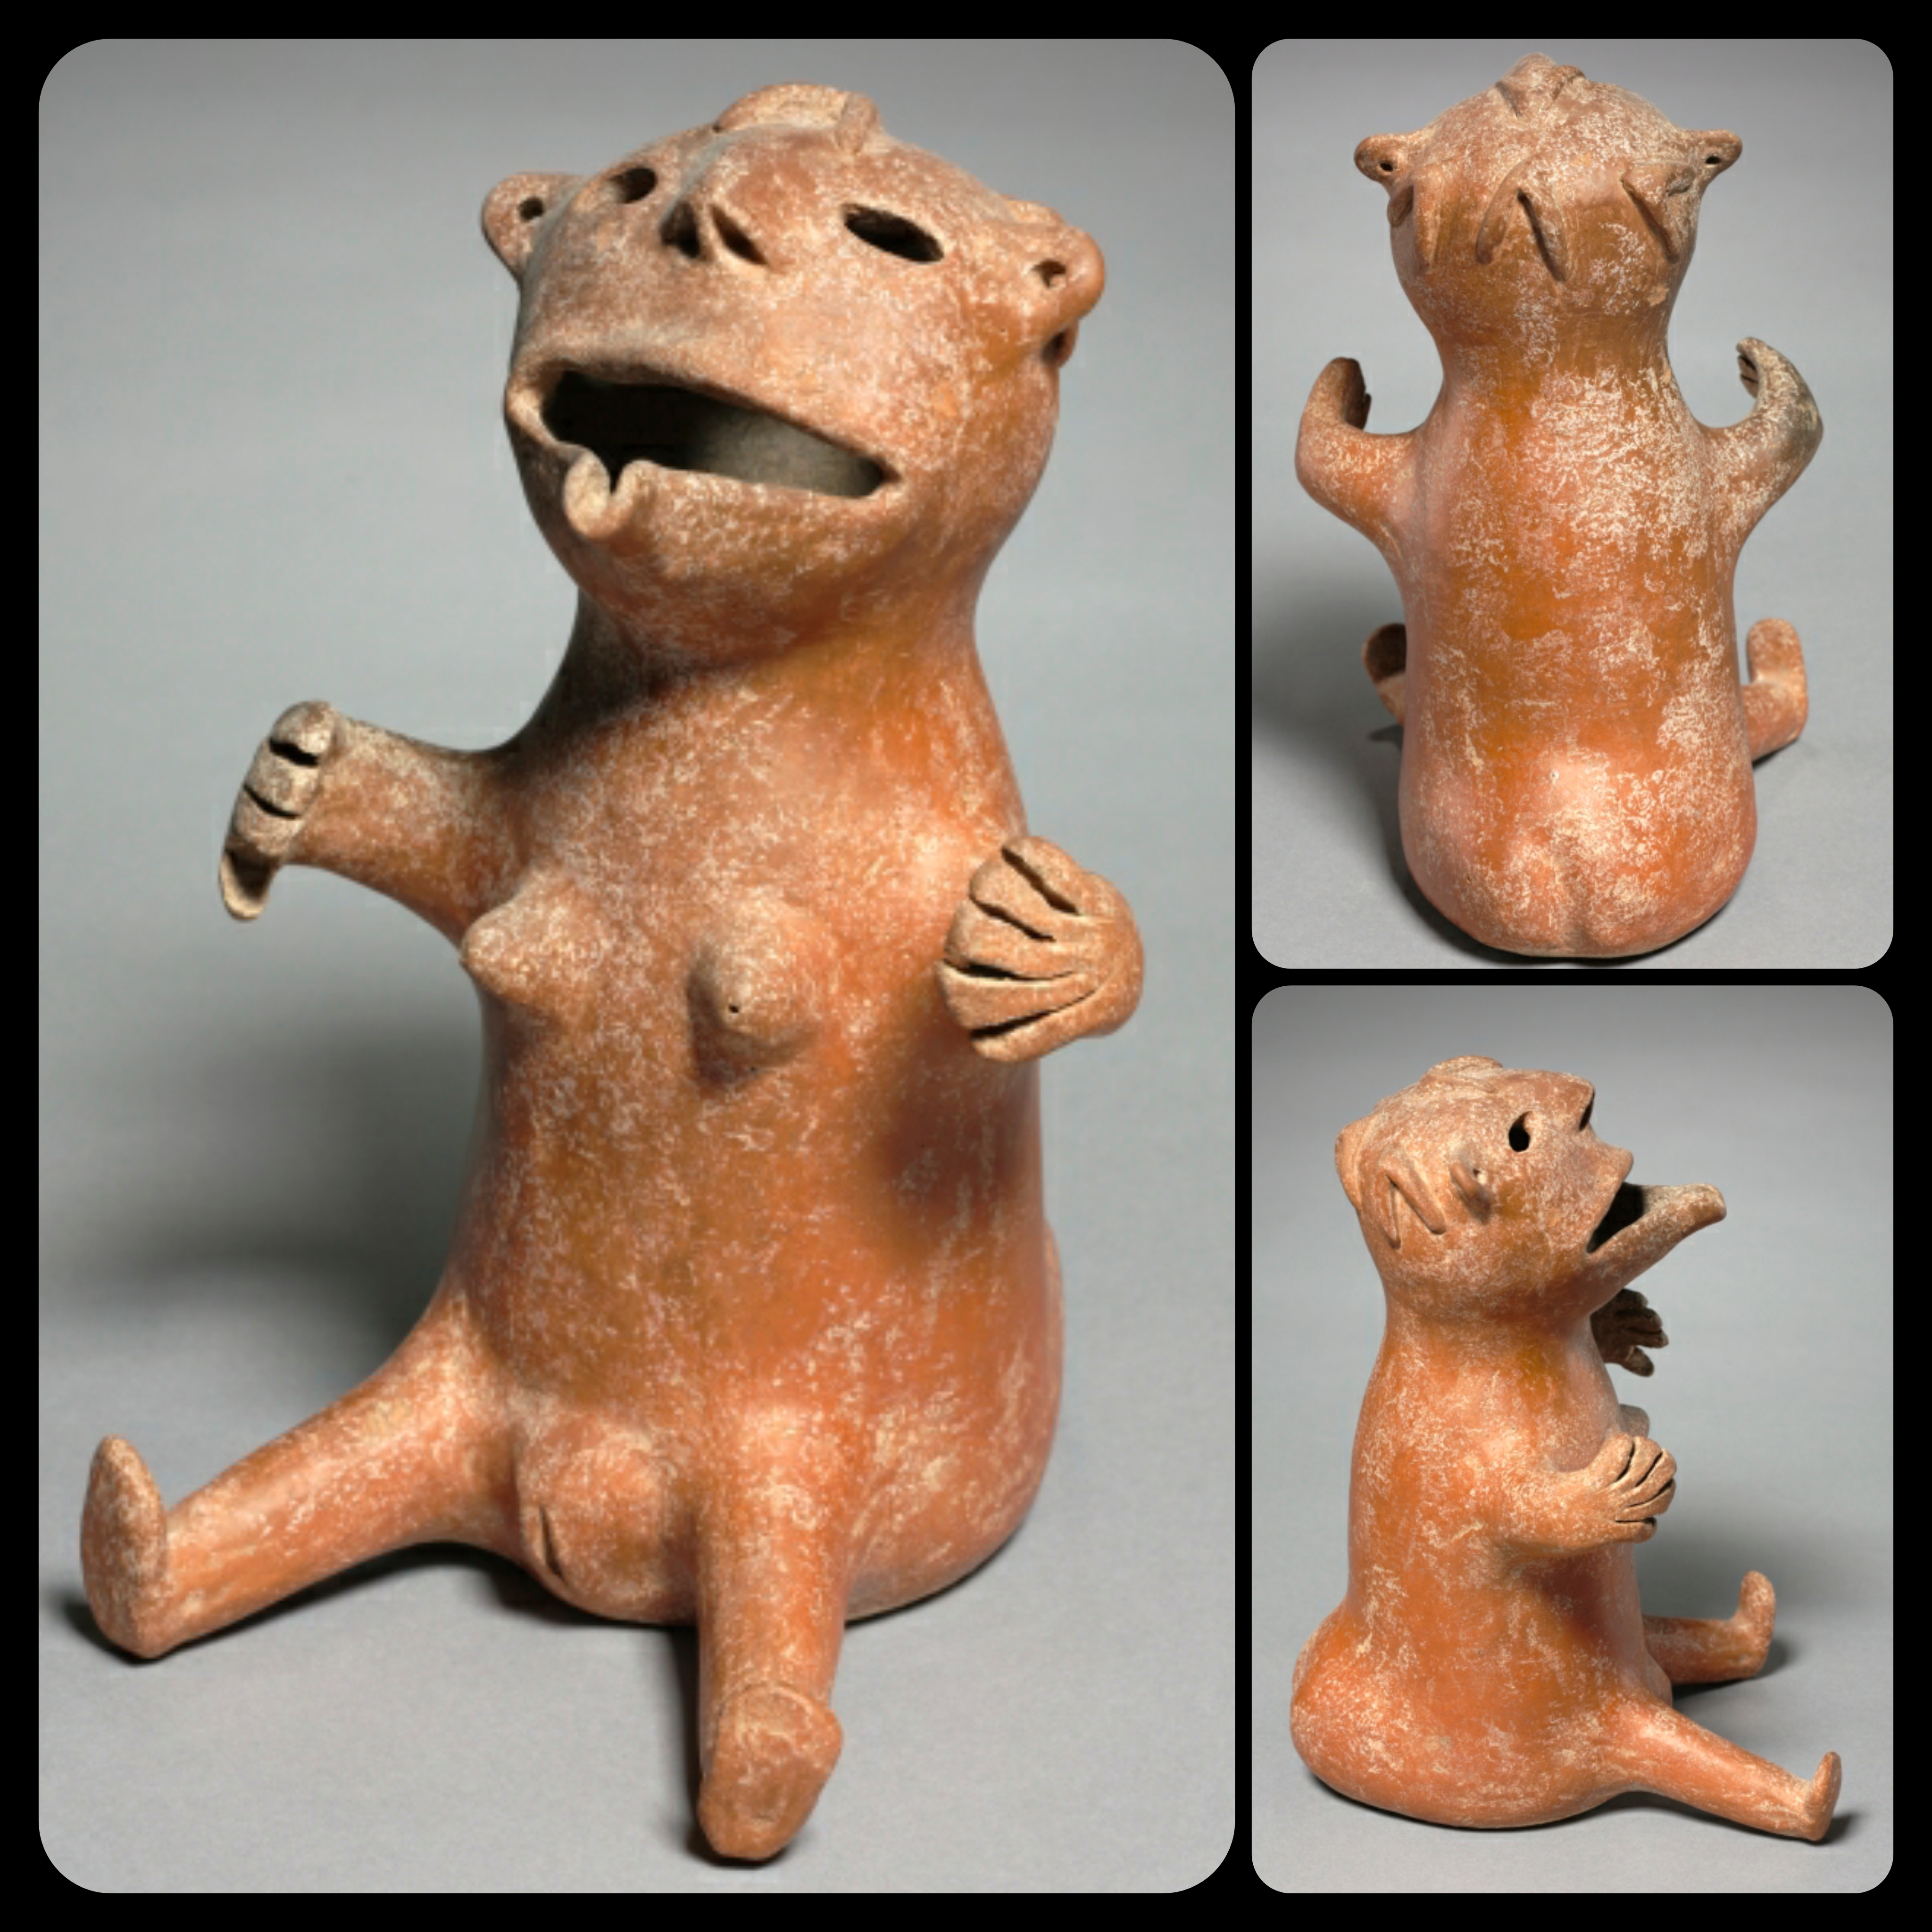 Bear-Woman Vessel from Iran, c. 1300-1100 BCE, it's believed that the sexual features sculpted onto this artifact were emphasized in order to enhance the fertility of any woman who drank from the vessel.jpg